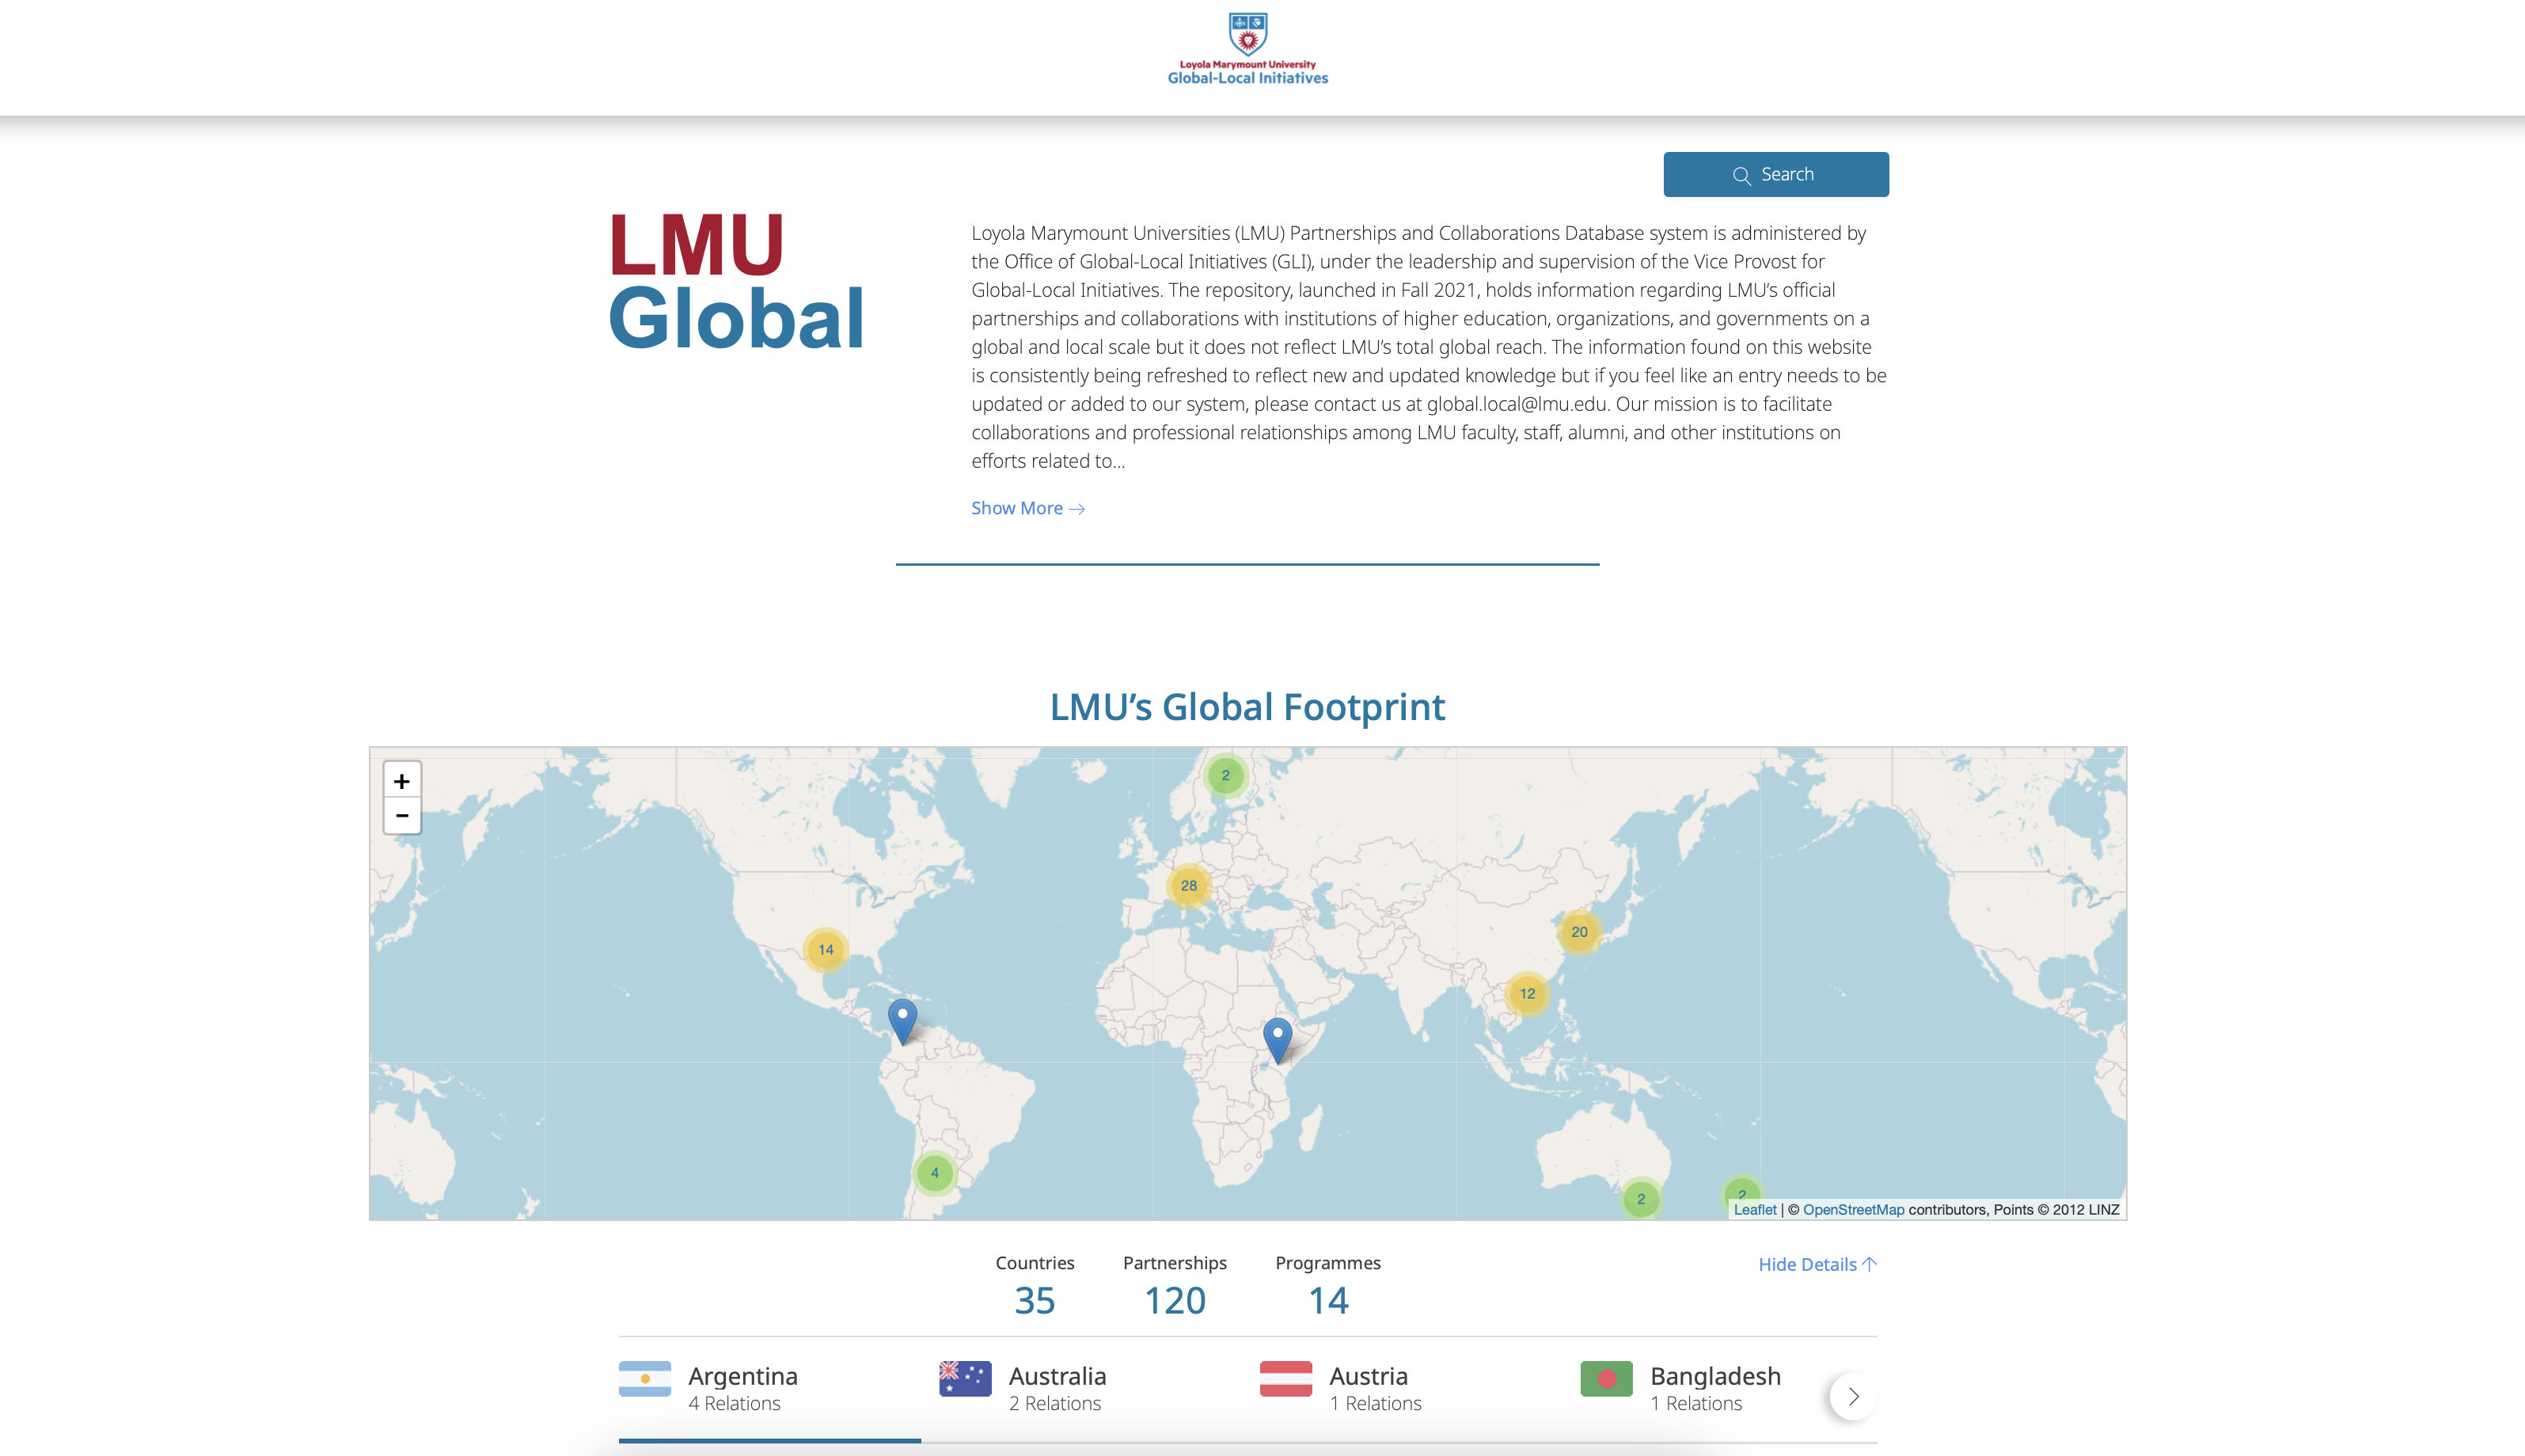 Global Local database website - Database to Collect LMU’s Worldwide Connections